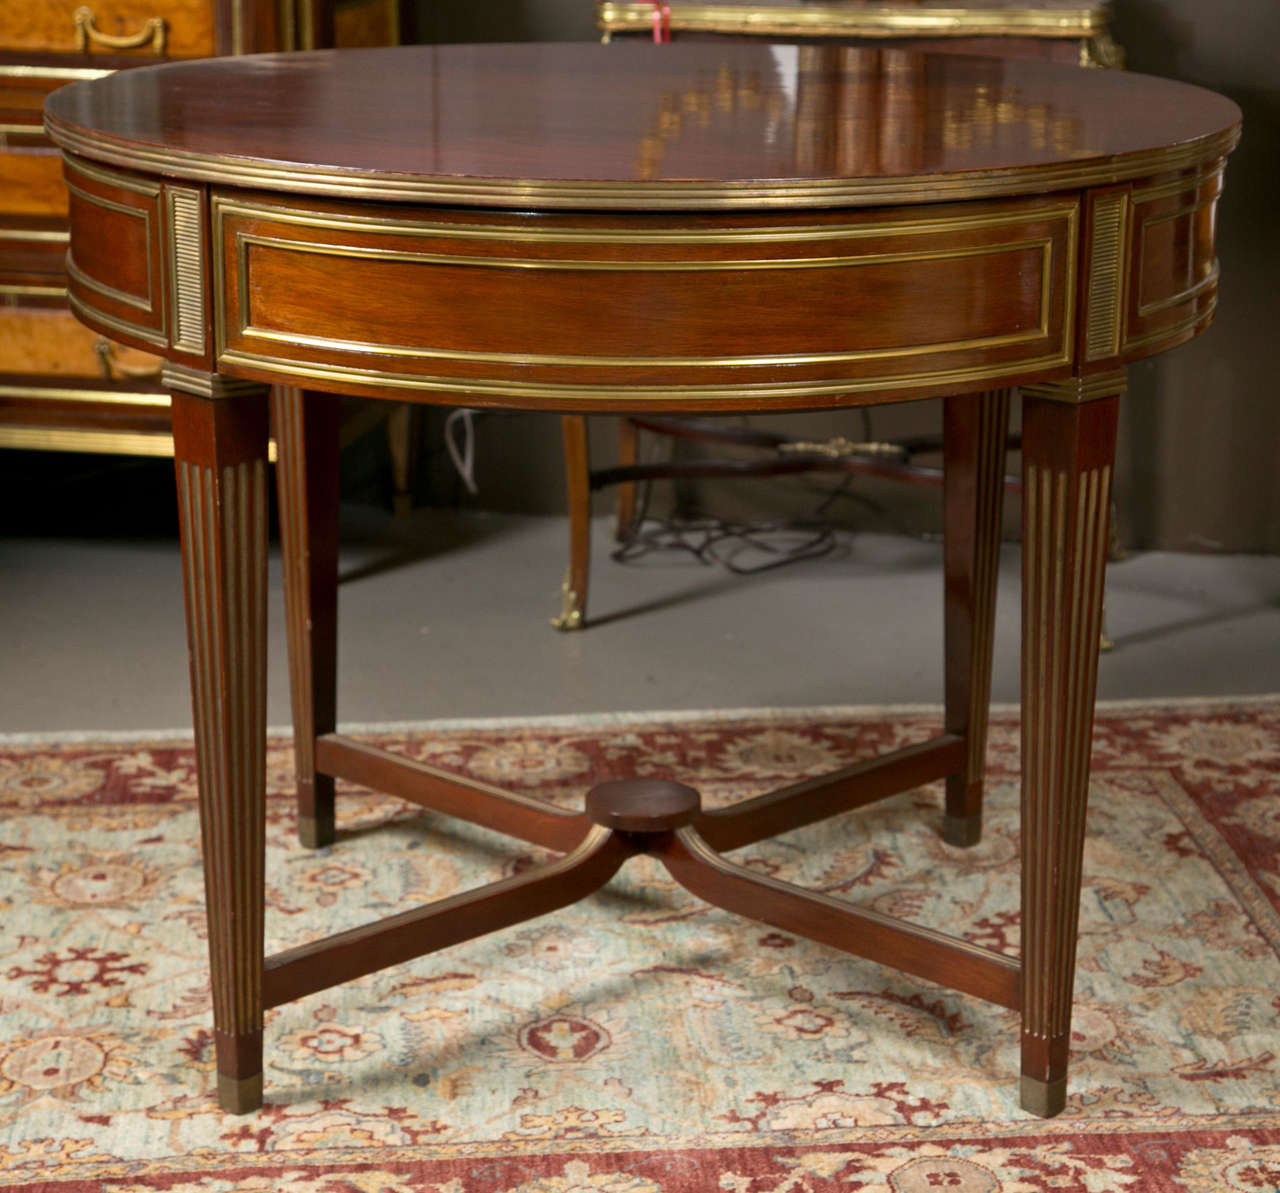 Fine flame mahogany Russian neoclassical centre table, circa 1860s. This table having bronze sabots leading to finely bronze fluted tapering legs supported by a bronze fluted undercarriage with pedestal center. The flame mahogany top wonderfully